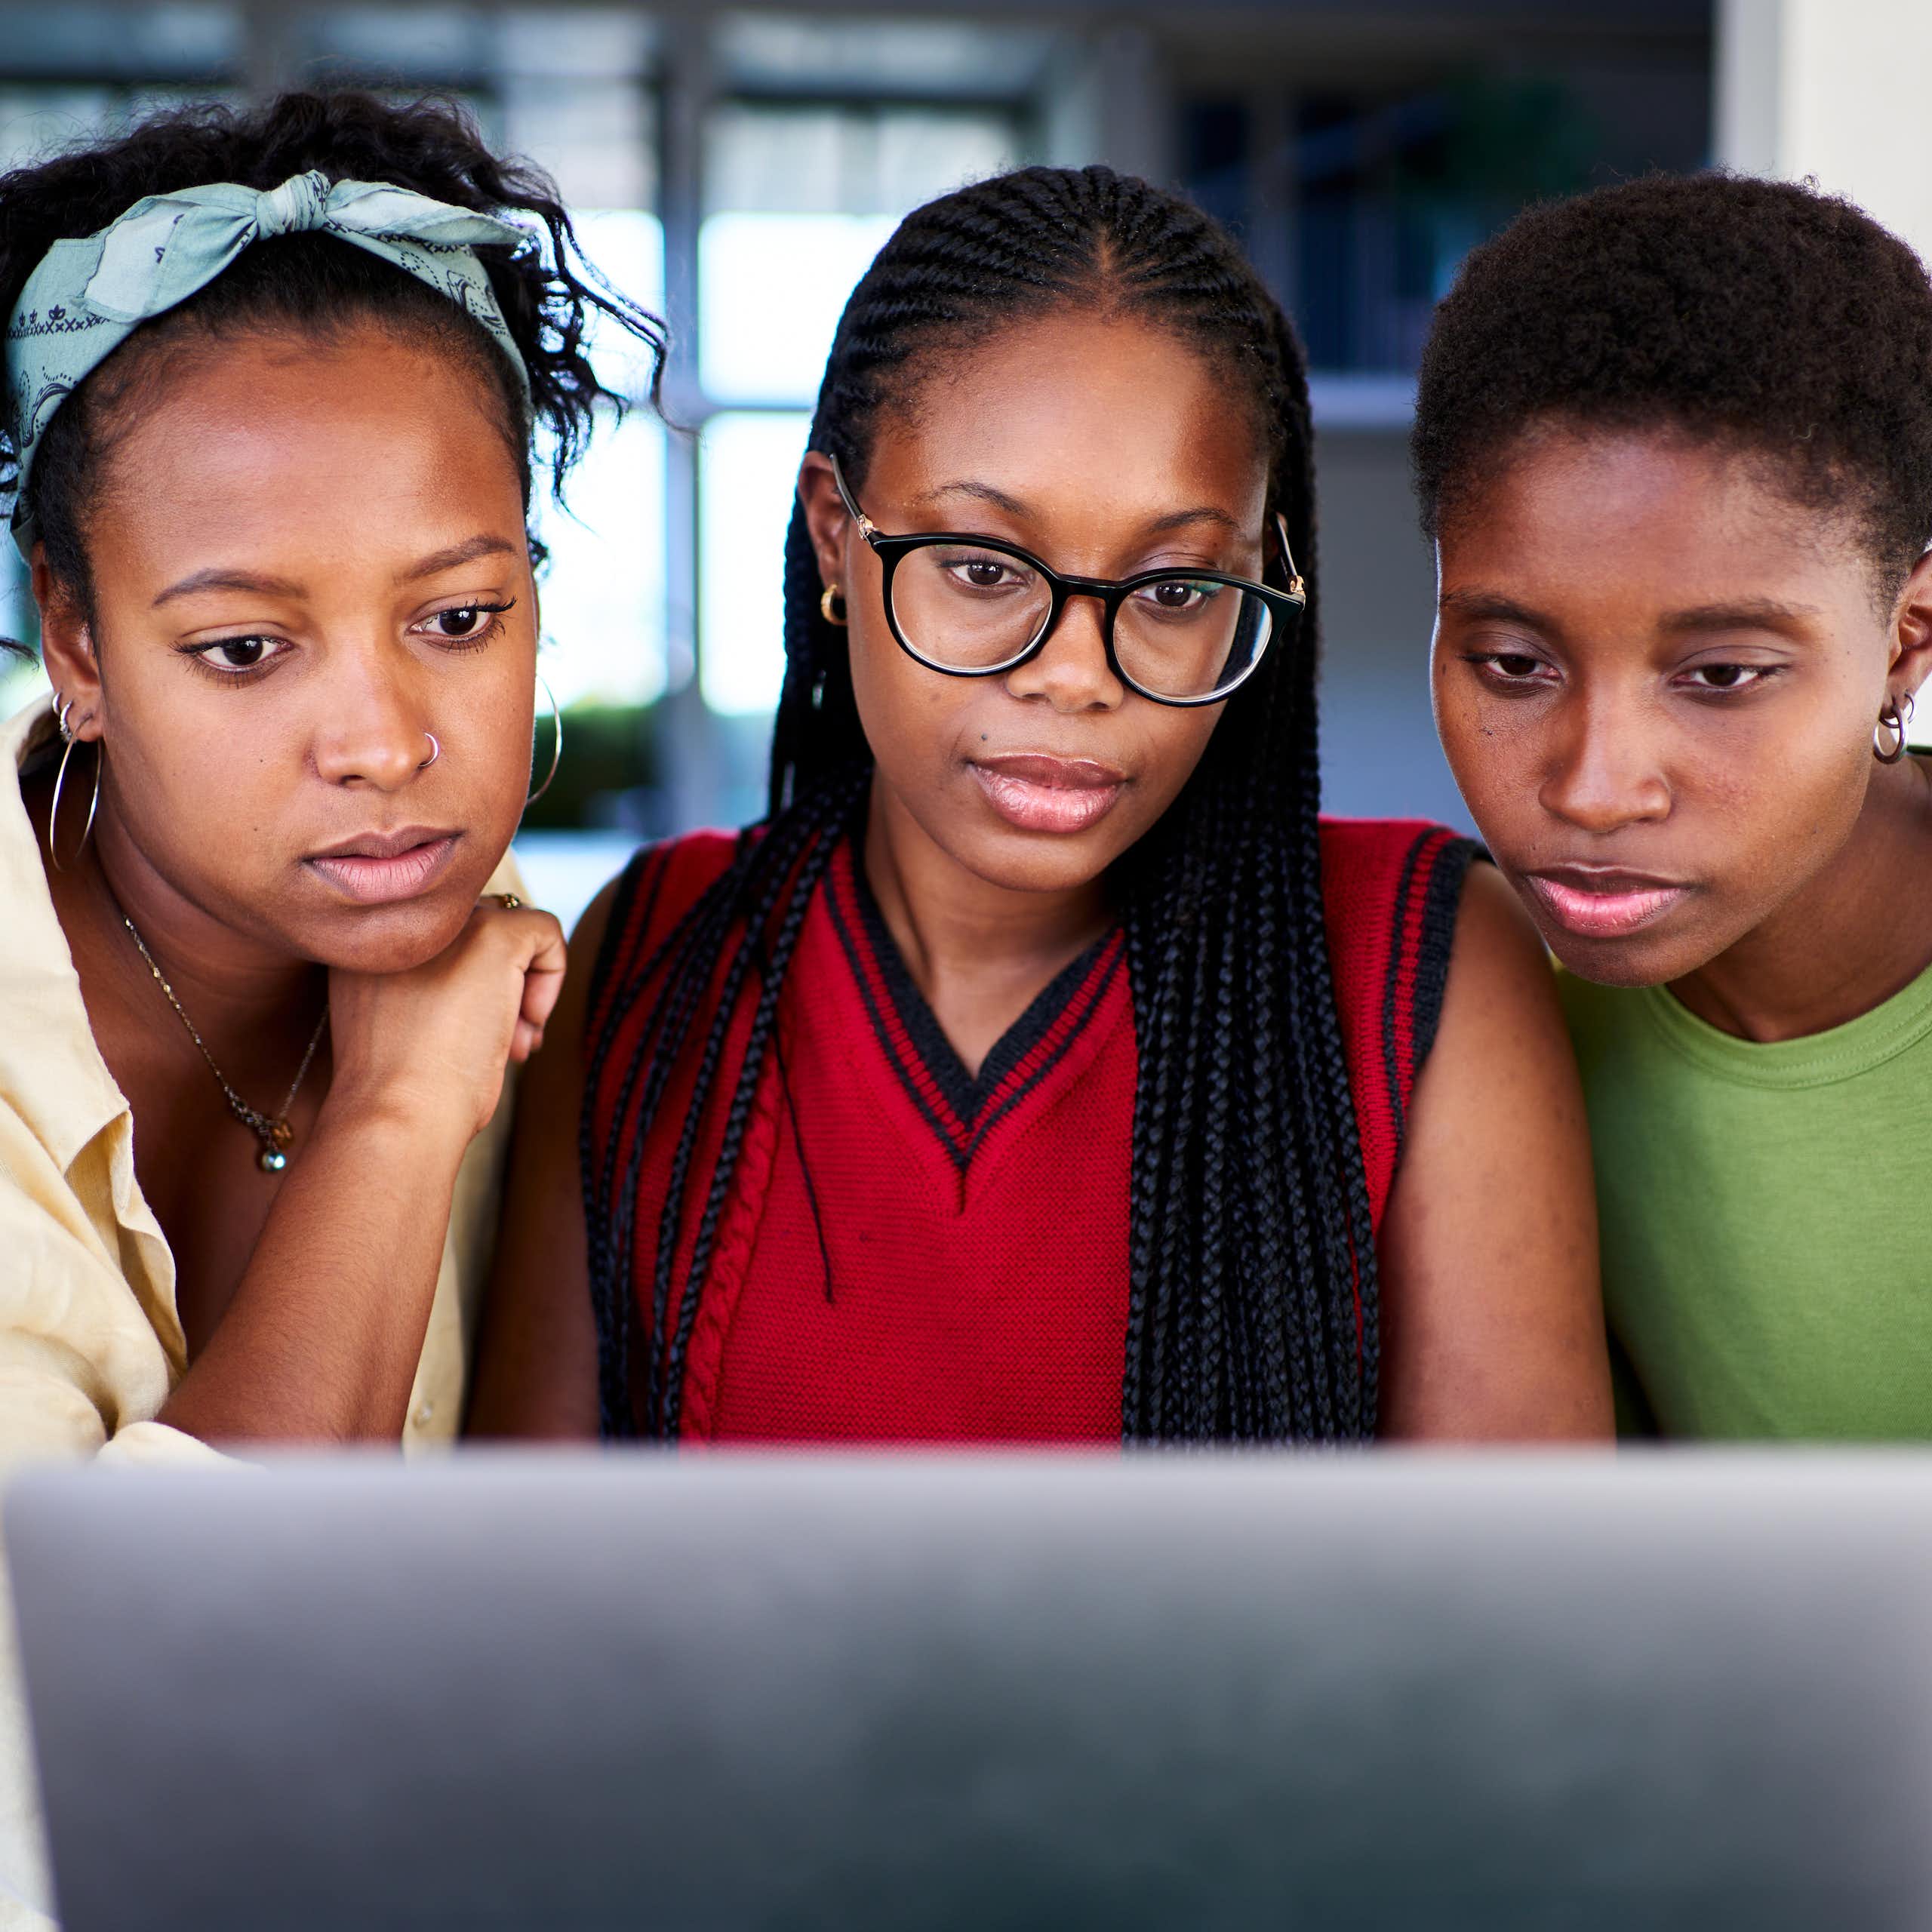 Three young Black women look at a laptop screen together.